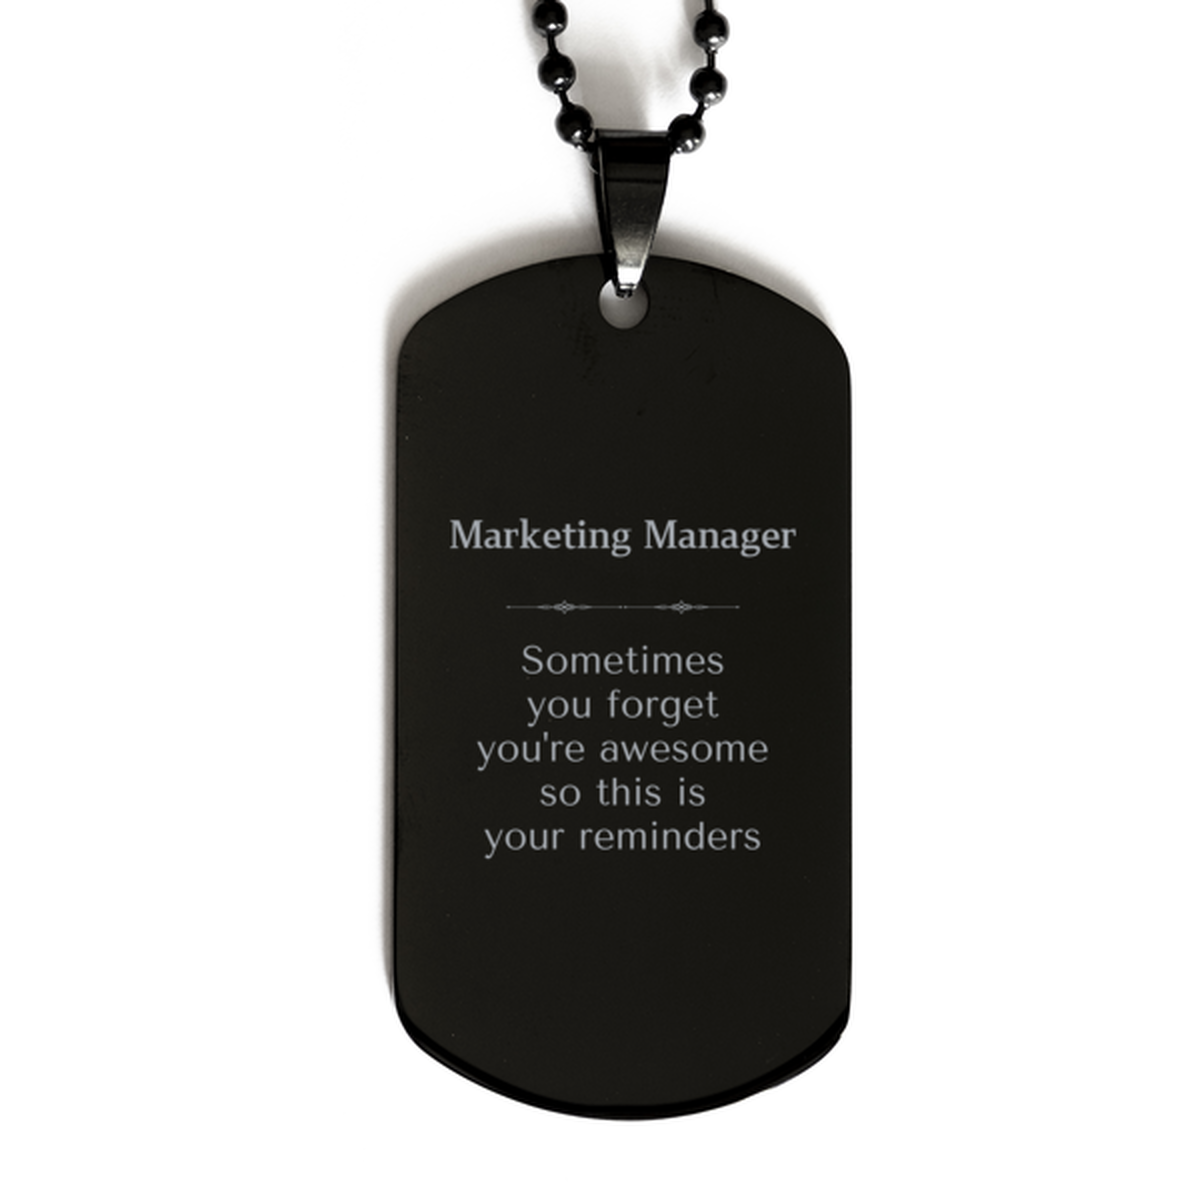 Sentimental Marketing Manager Black Dog Tag, Marketing Manager Sometimes you forget you're awesome so this is your reminders, Graduation Christmas Birthday Gifts for Marketing Manager, Men, Women, Coworkers